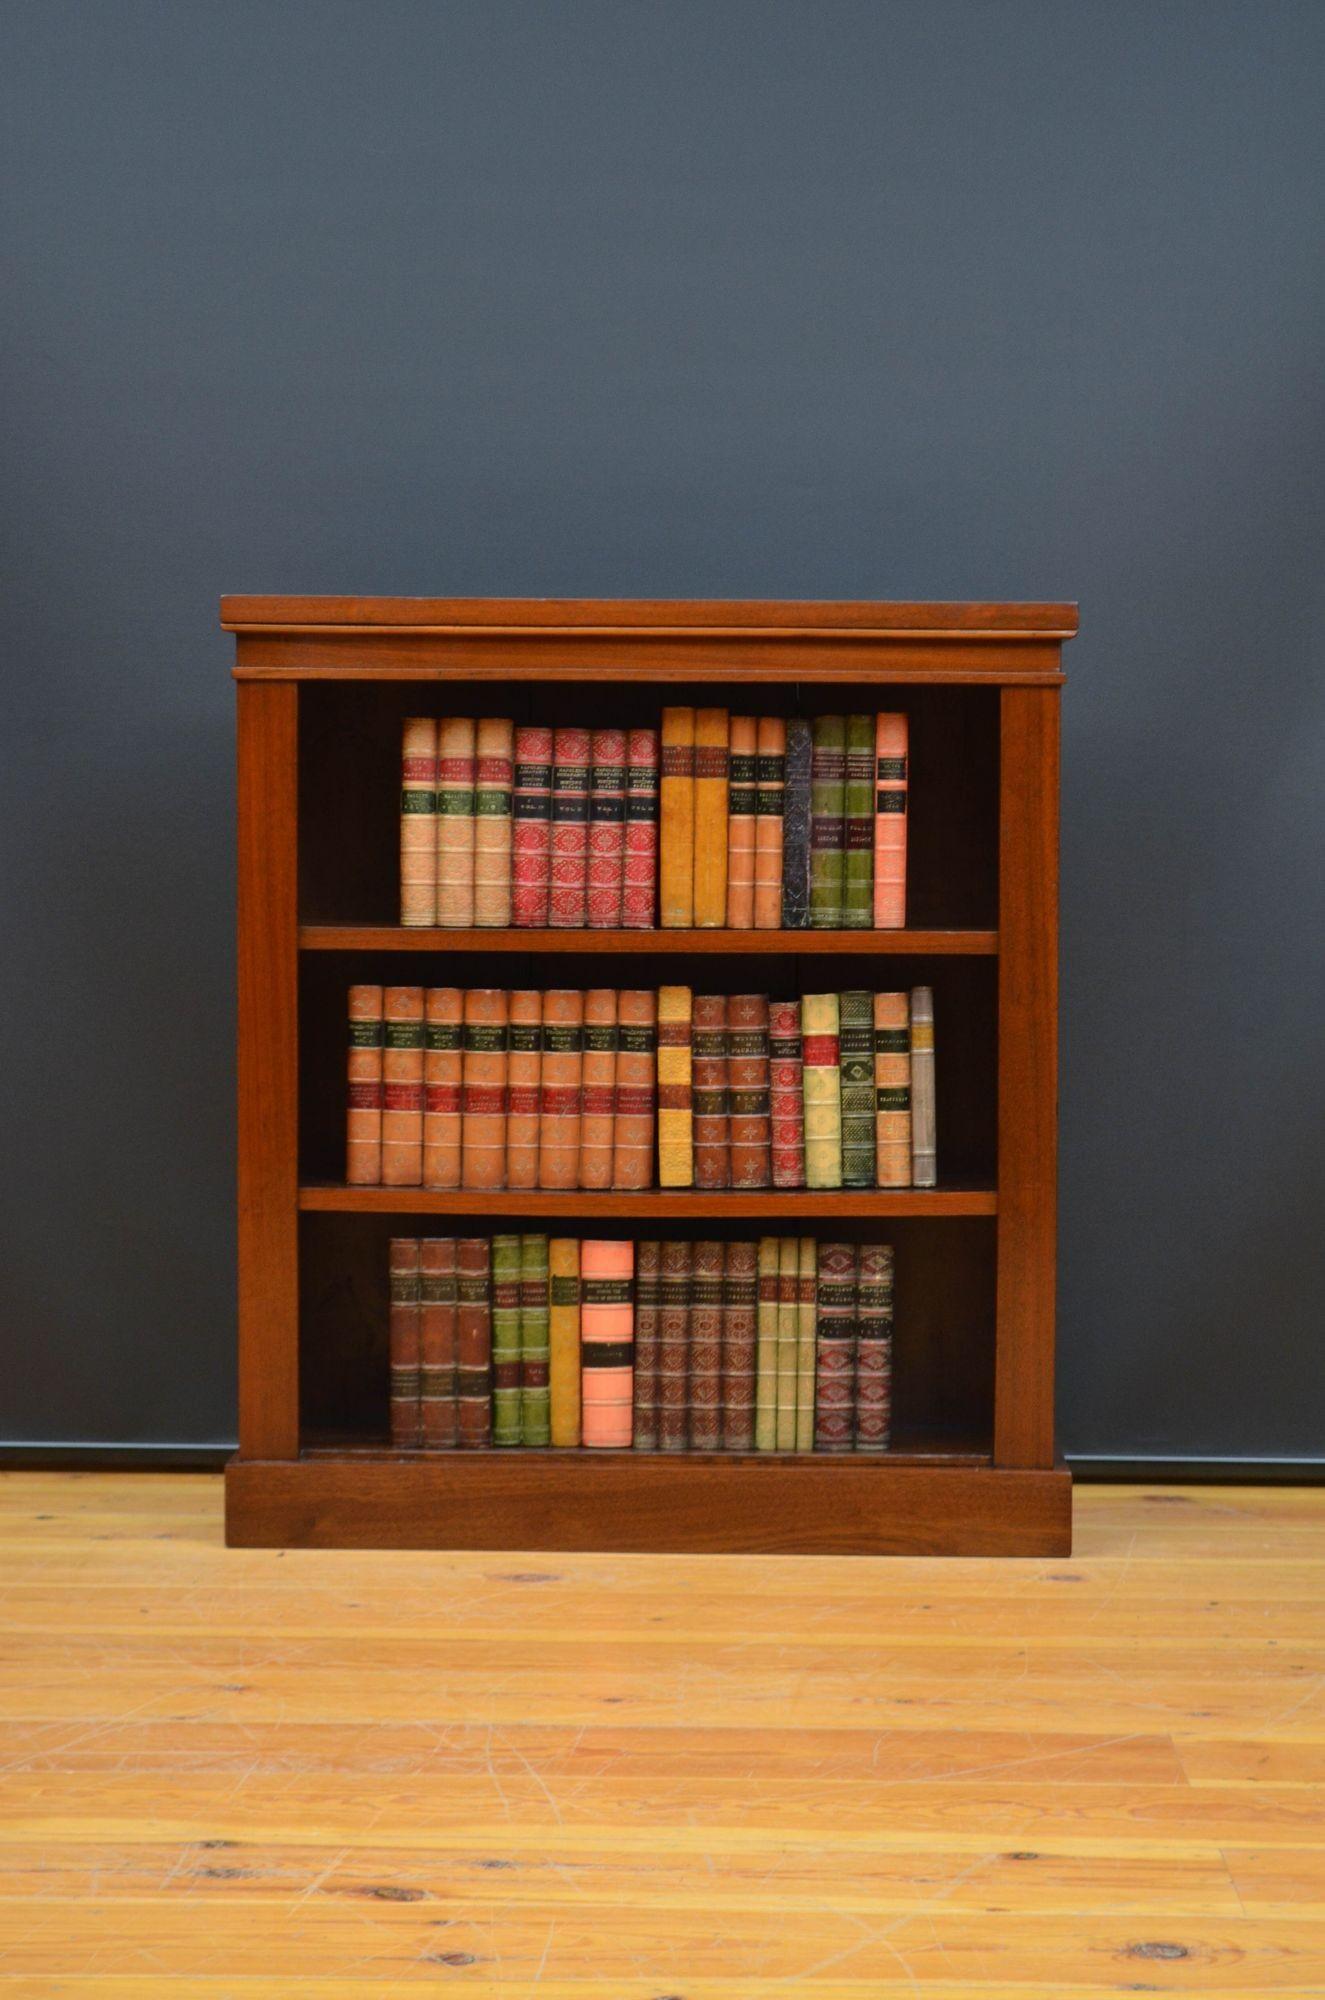 Sn5468 Late Victorian / Edwardian figured walnut open bookcase of unusually narrow proportions, having oversailing top above a shallow frieze and two height adjustable shelves, all standing on plinth base. This antique bookcase has been